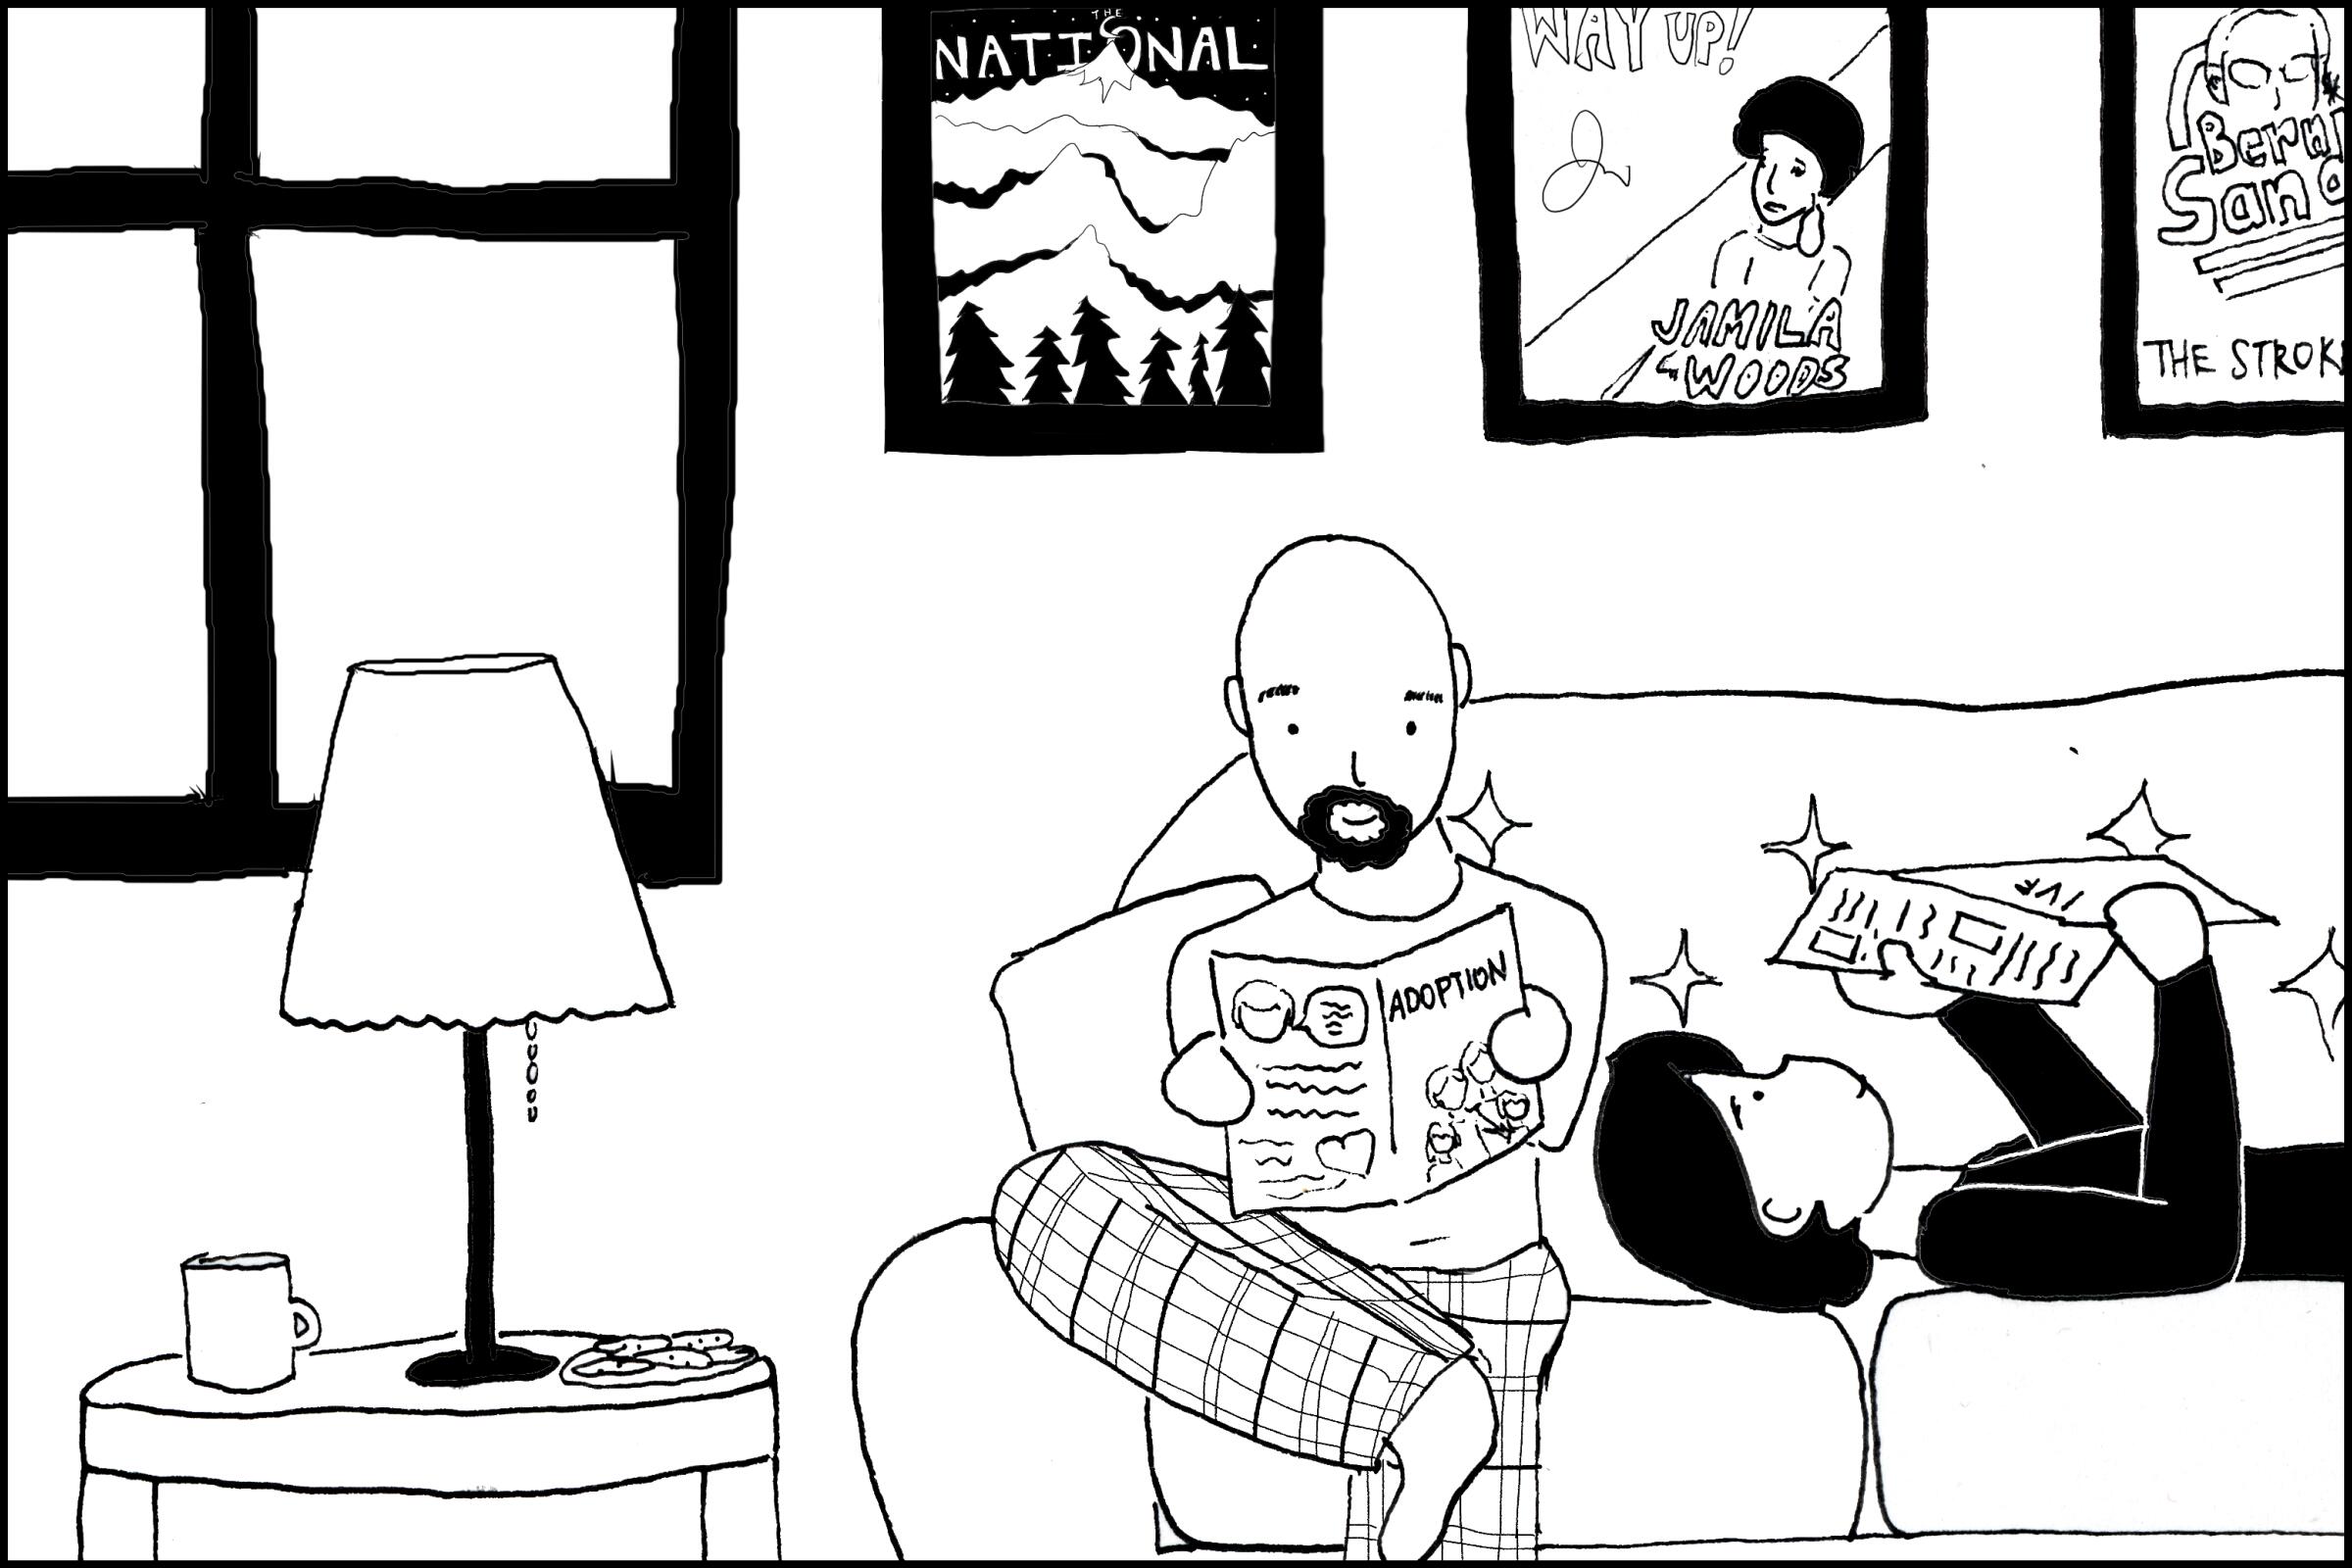 Illo of a woman and man on a couch. The woman is lying down and man is sitting up reading a book with "Adoption" on the cover